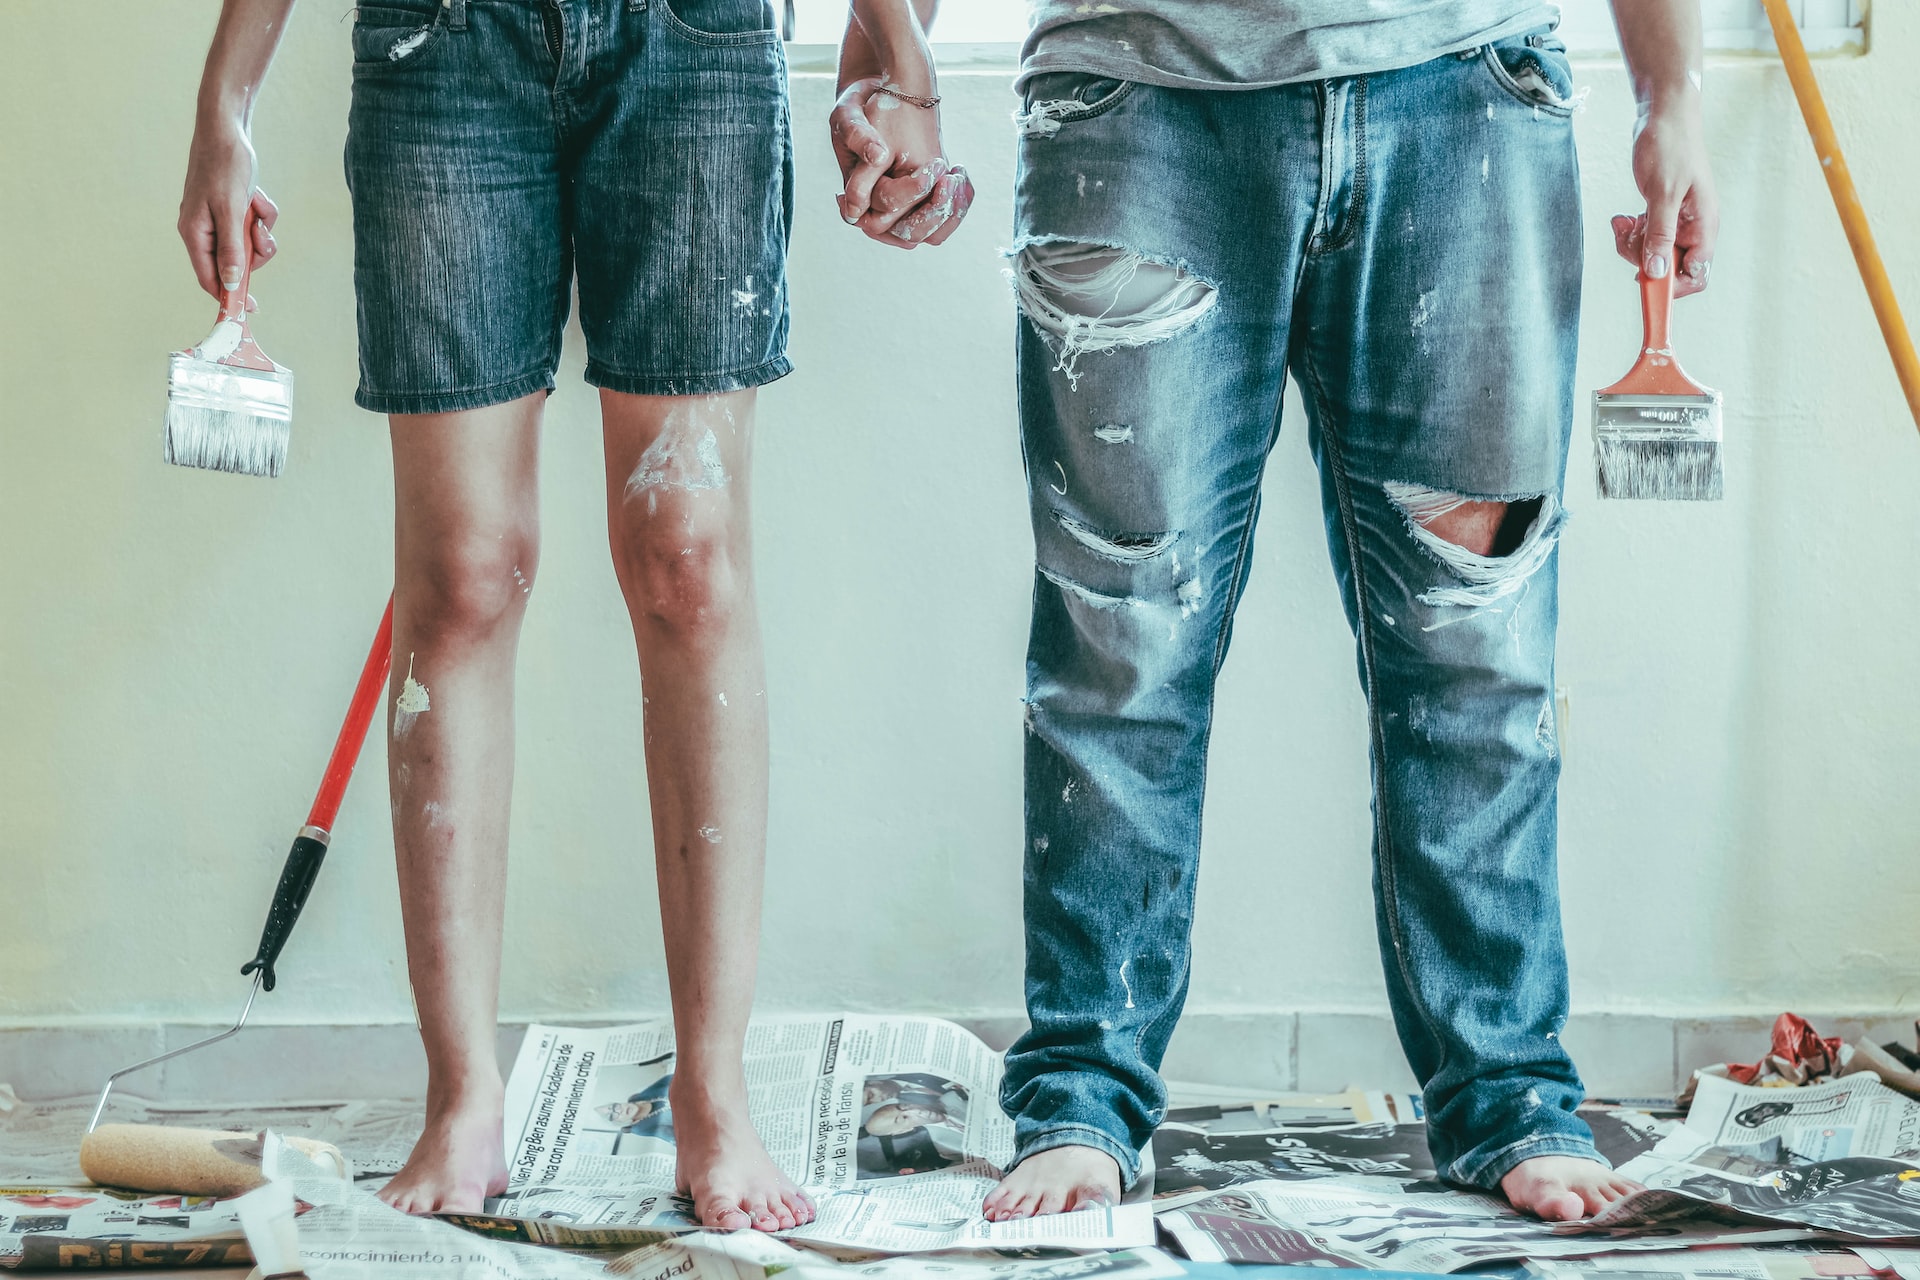 4 Things You Need to Know Before Renovating a Property